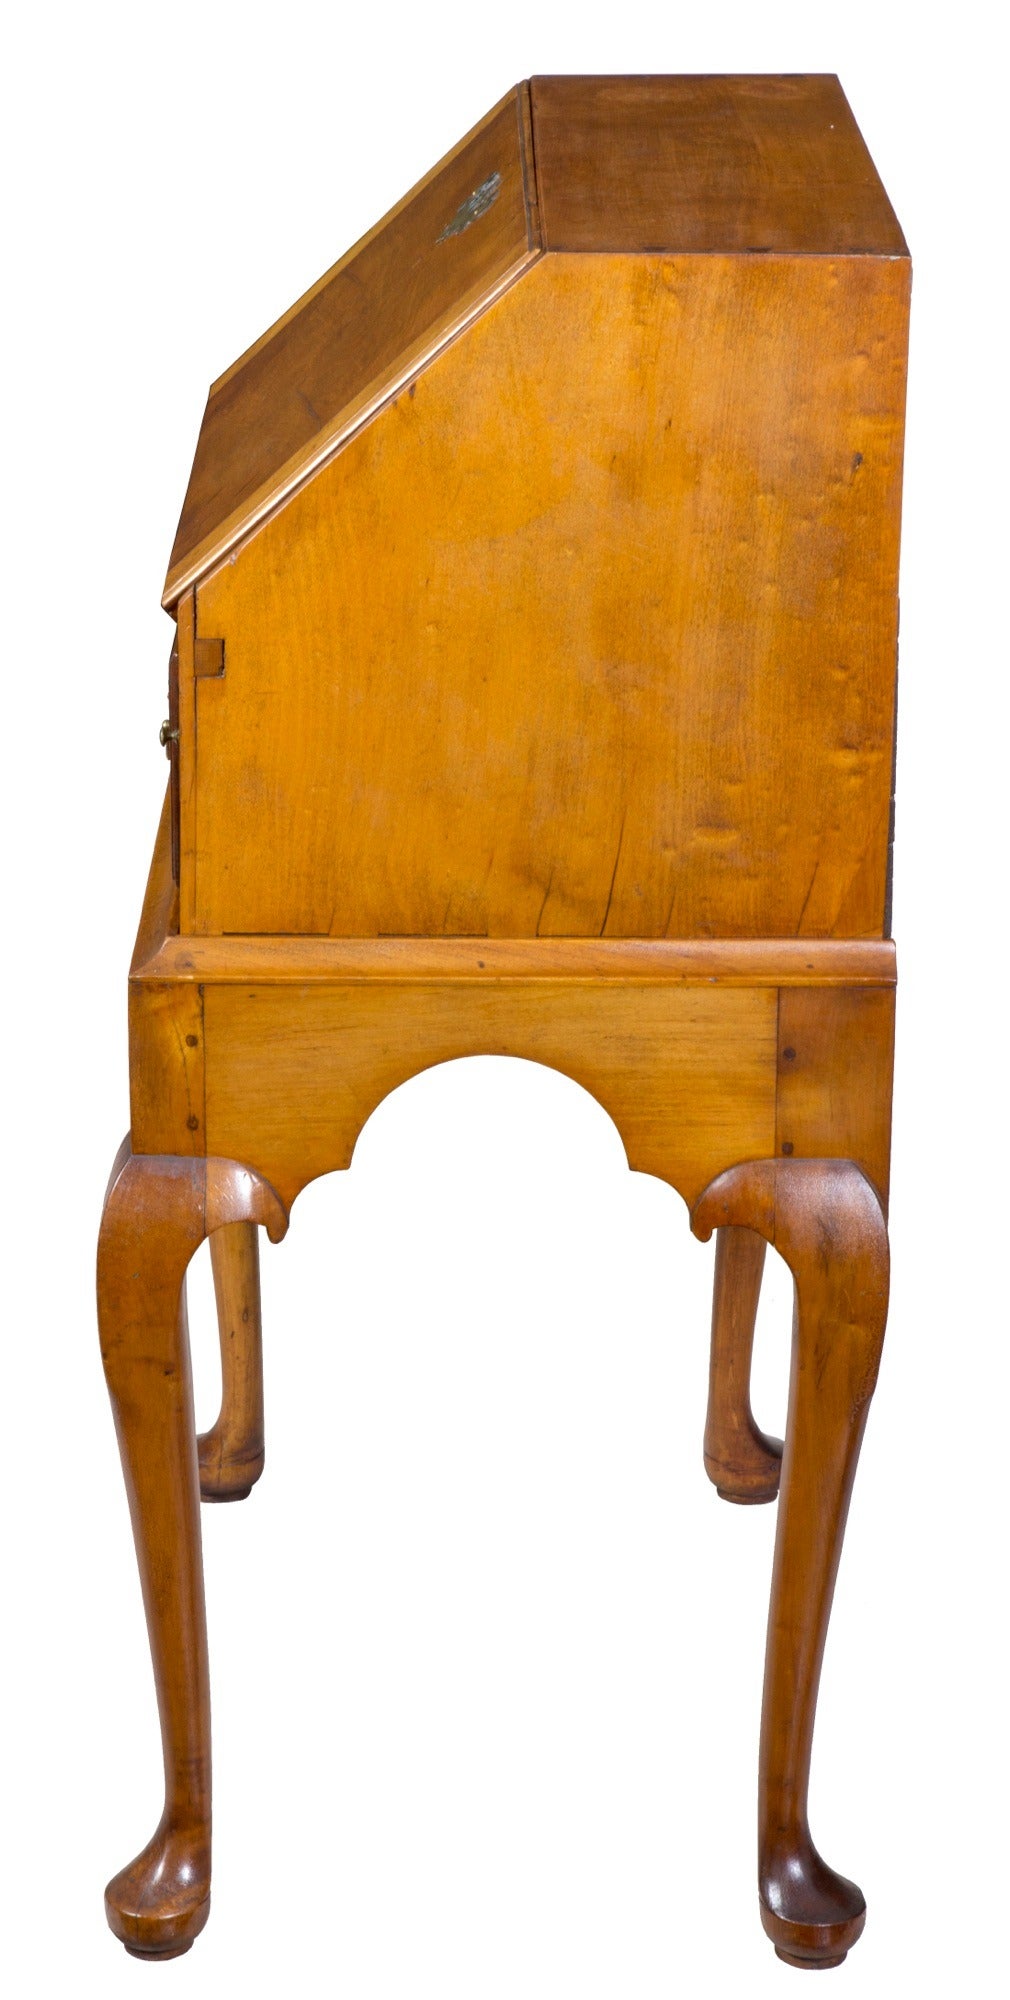 Mid-18th Century Diminutive Maple Queen Anne Lady’s / Child’s Desk on Frame, Salem, circa 1760 For Sale